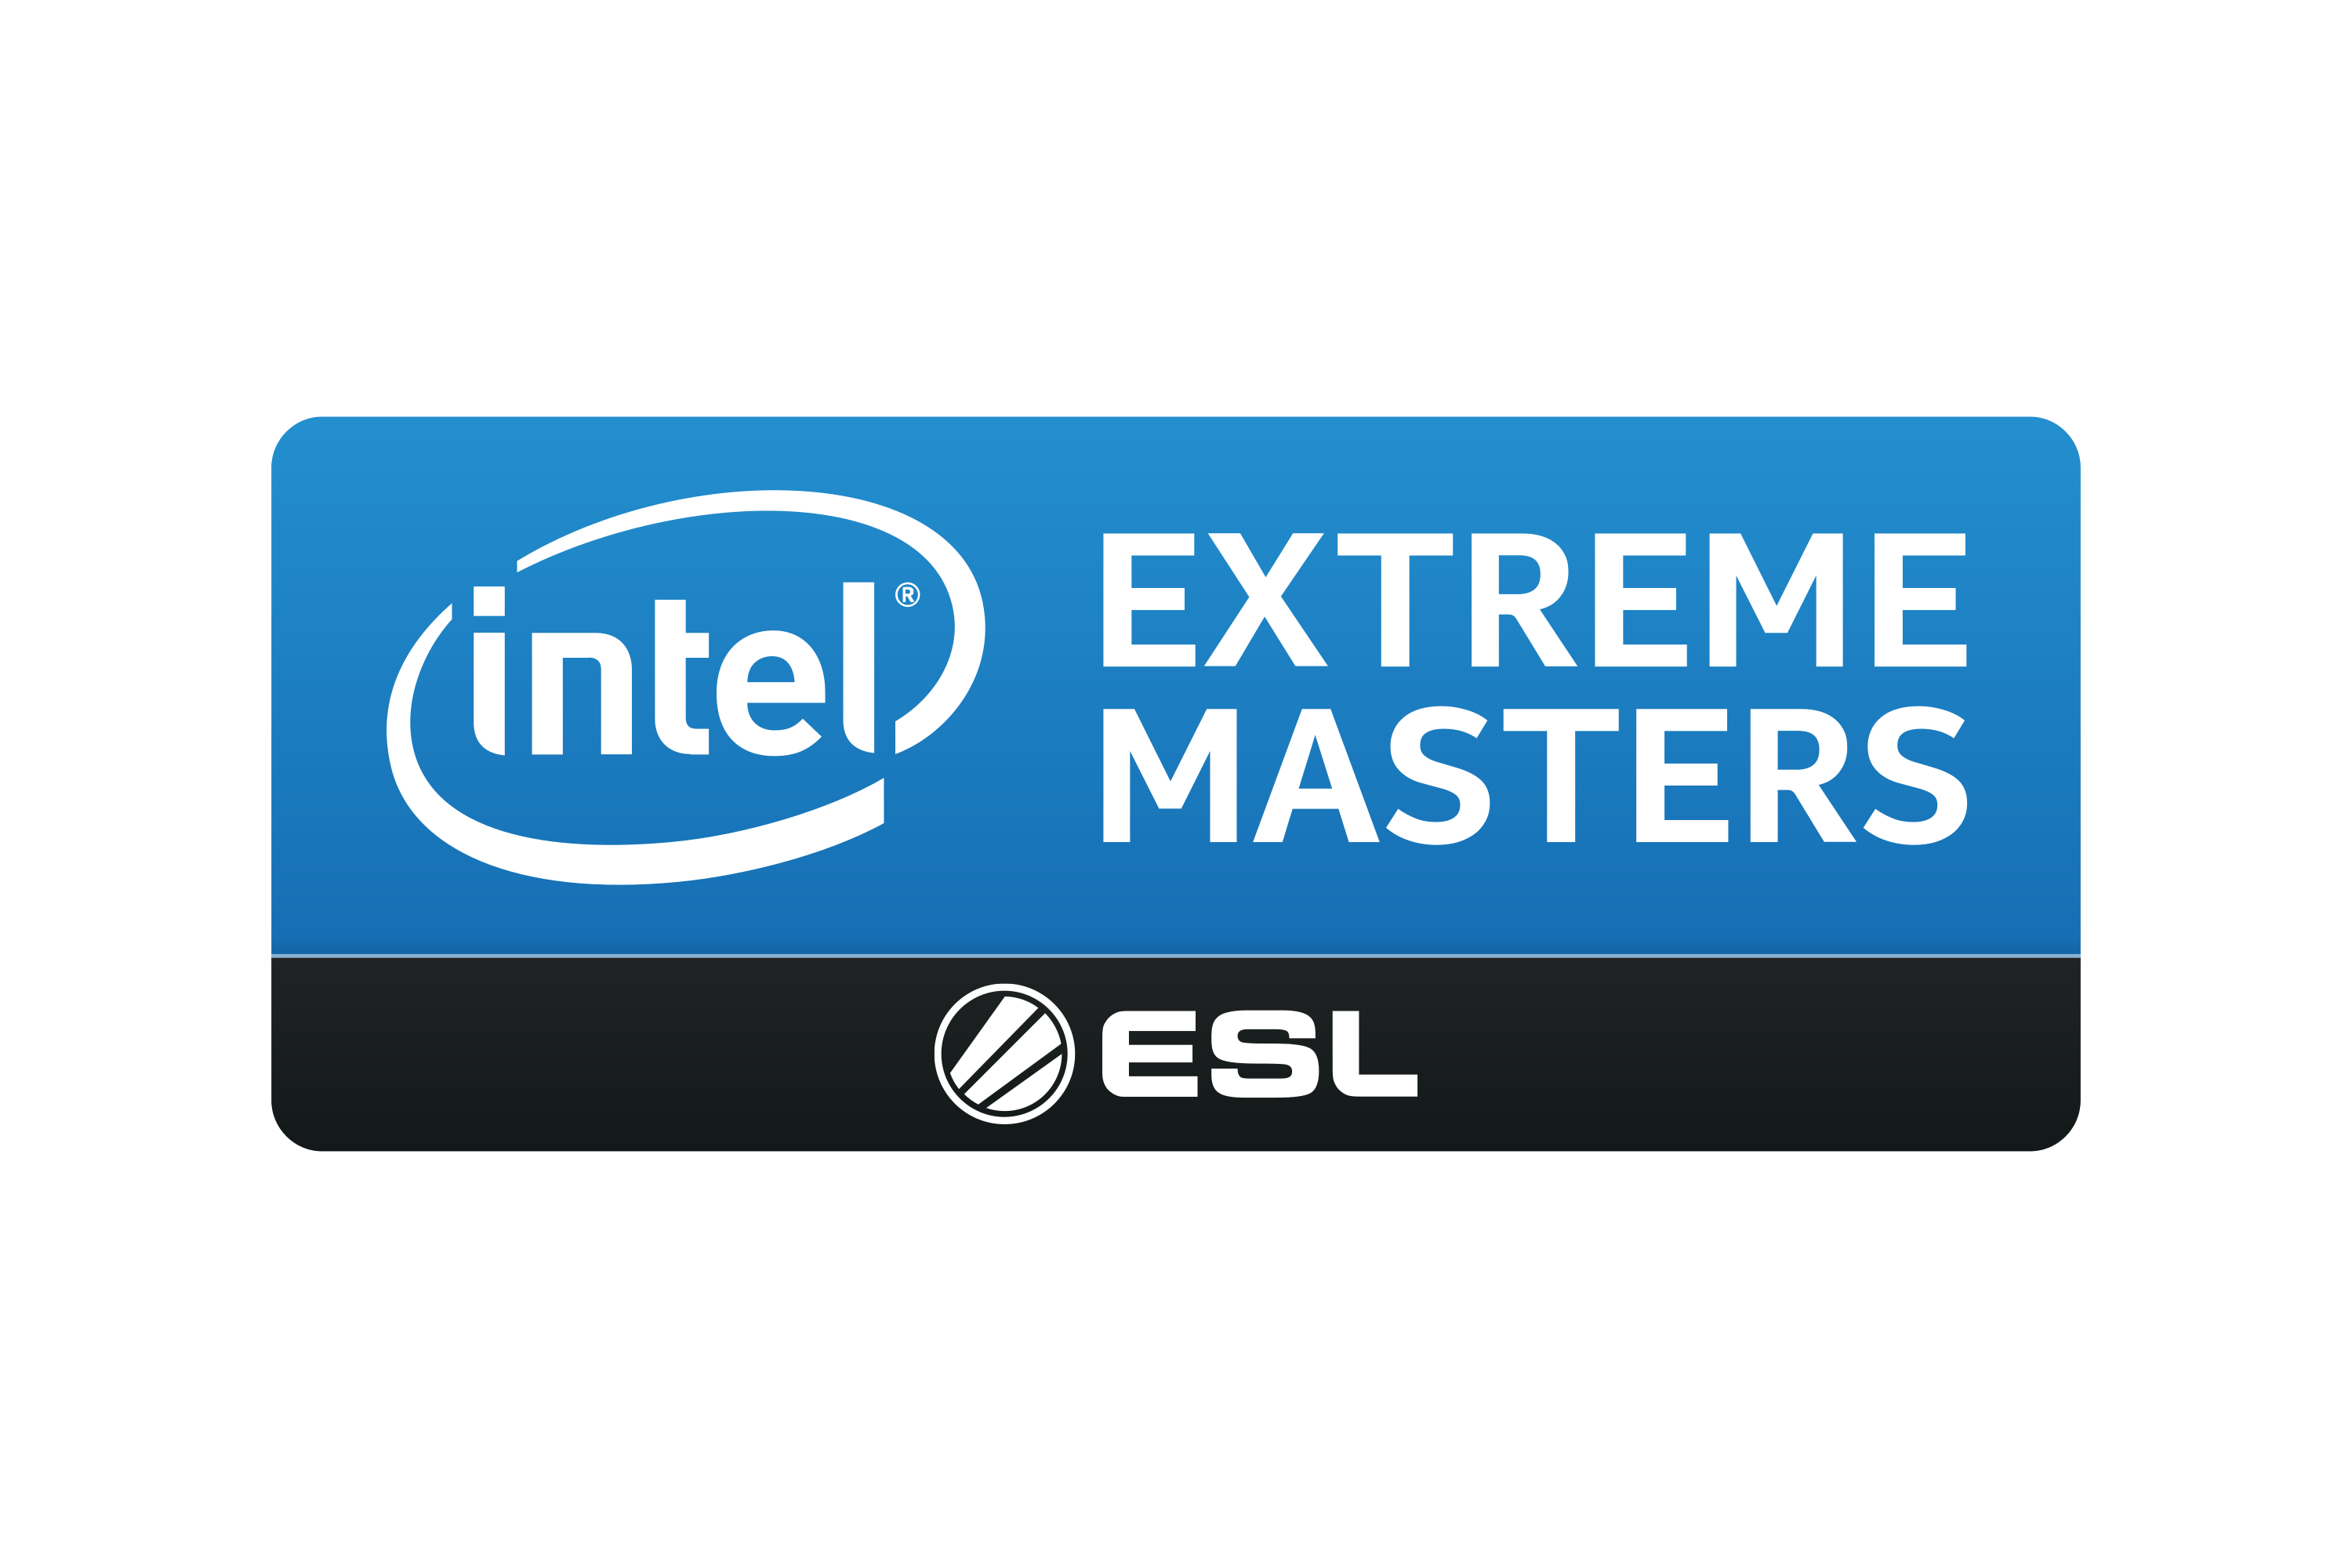 Download Intel Extreme Masters Logo in SVG Vector or PNG File Format 